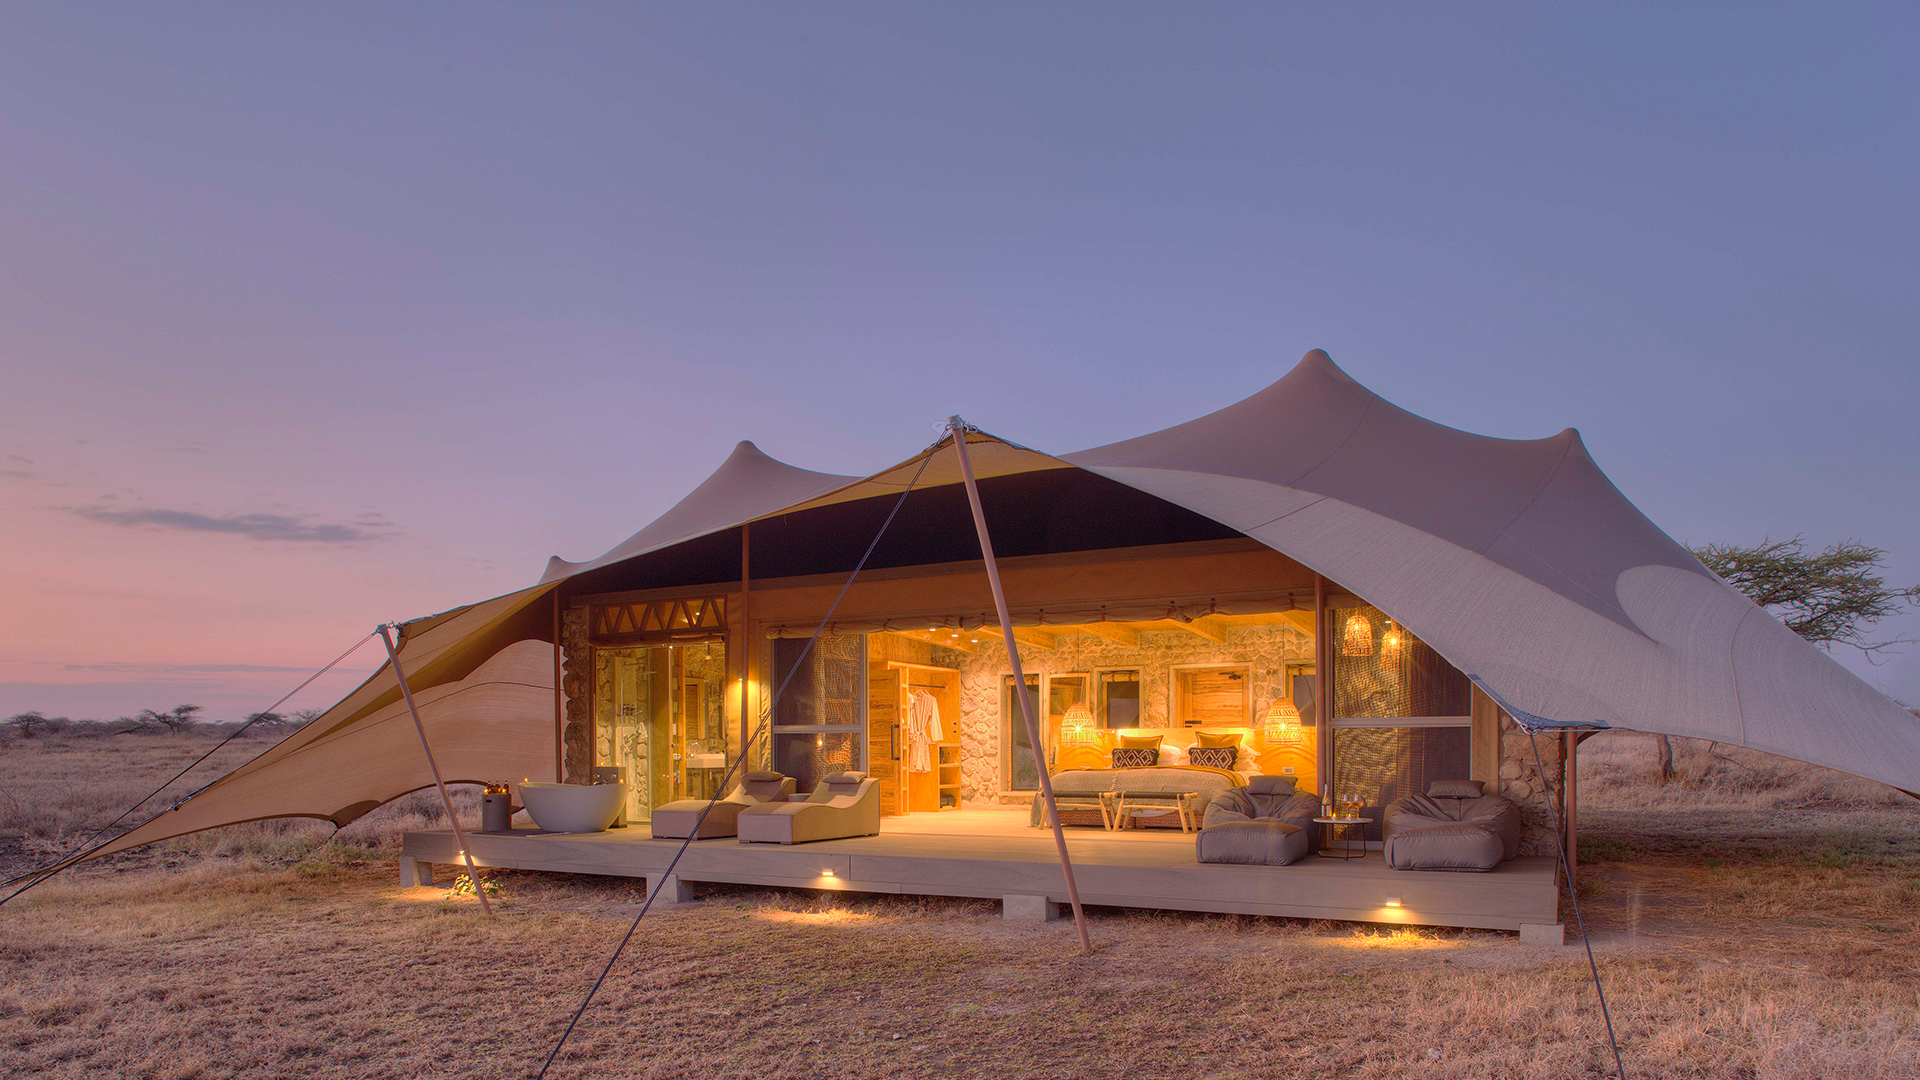 The Places You'll Stay on an African Safari in Tanzania